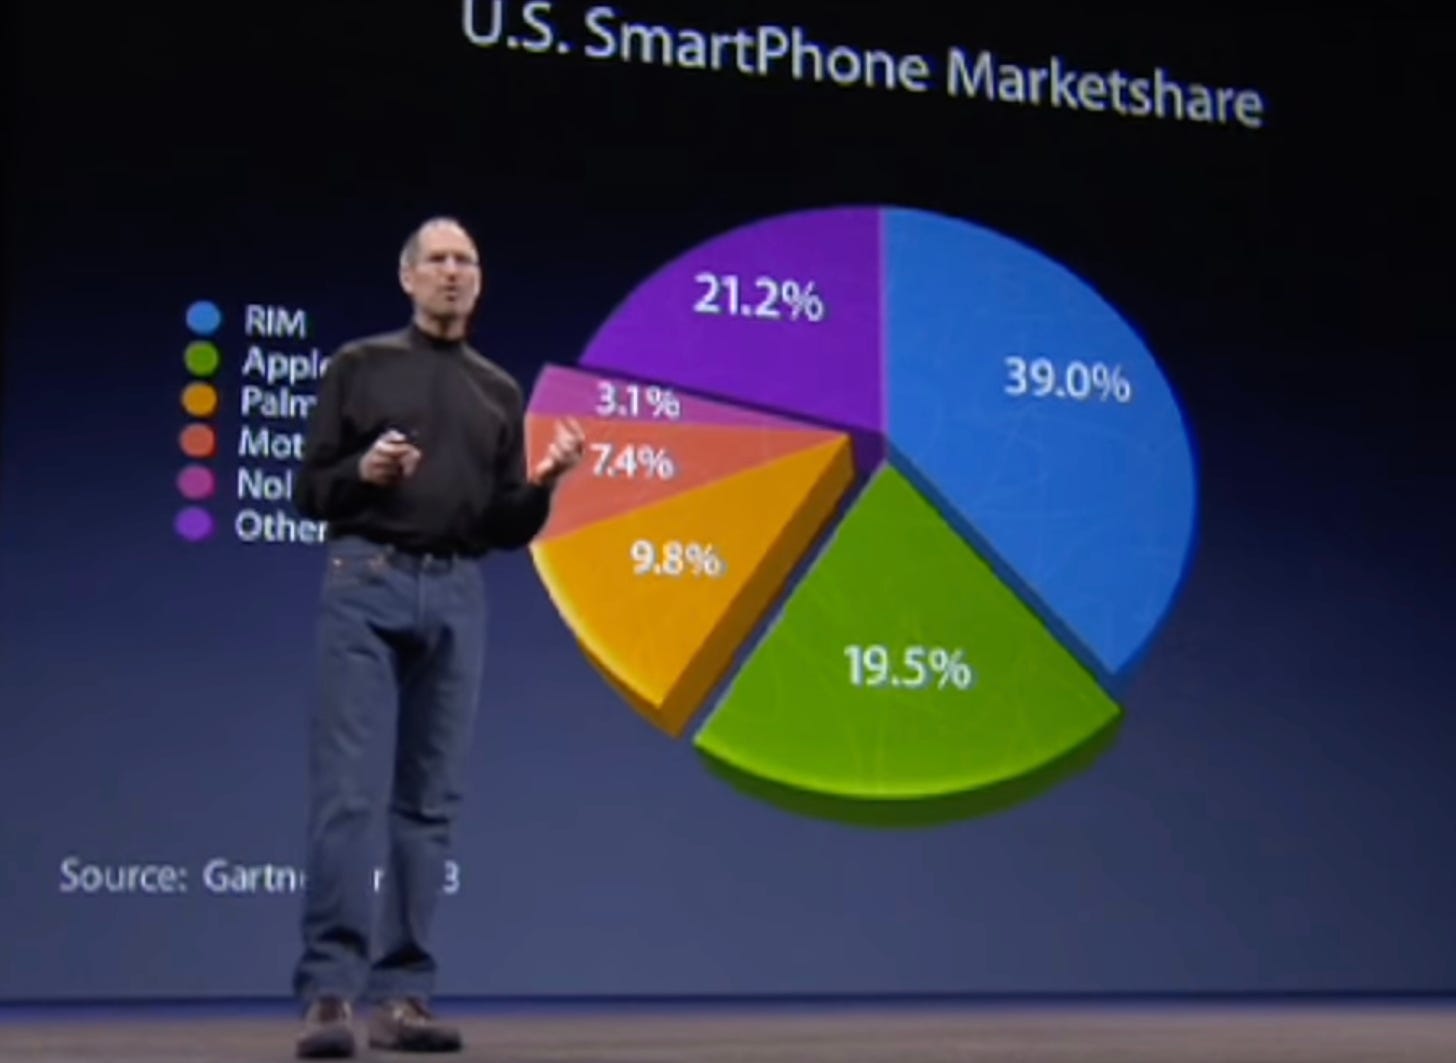 Steve Jobs on stage presenting a slide "US SmartPhone Market Share" as a pie chart. RIM is 39%, Apple is 19.5%, Palm is 9.8%, Motorola is 7.4%, Nokia is 3.1%, and other is 21.2%